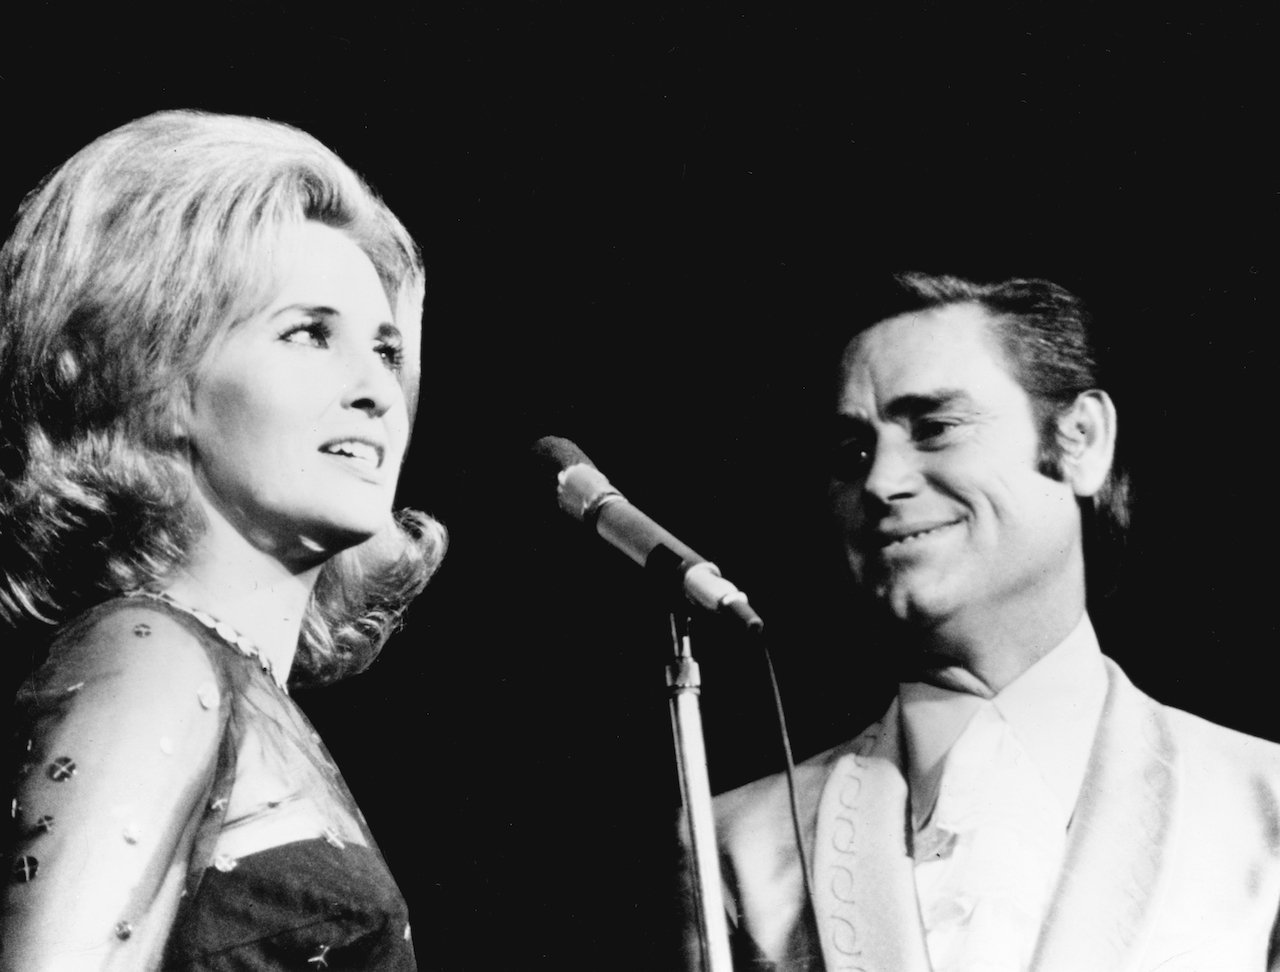 George Jones had a tumultuous marriage with Tammy Wynette, pictured performing together c. 1970